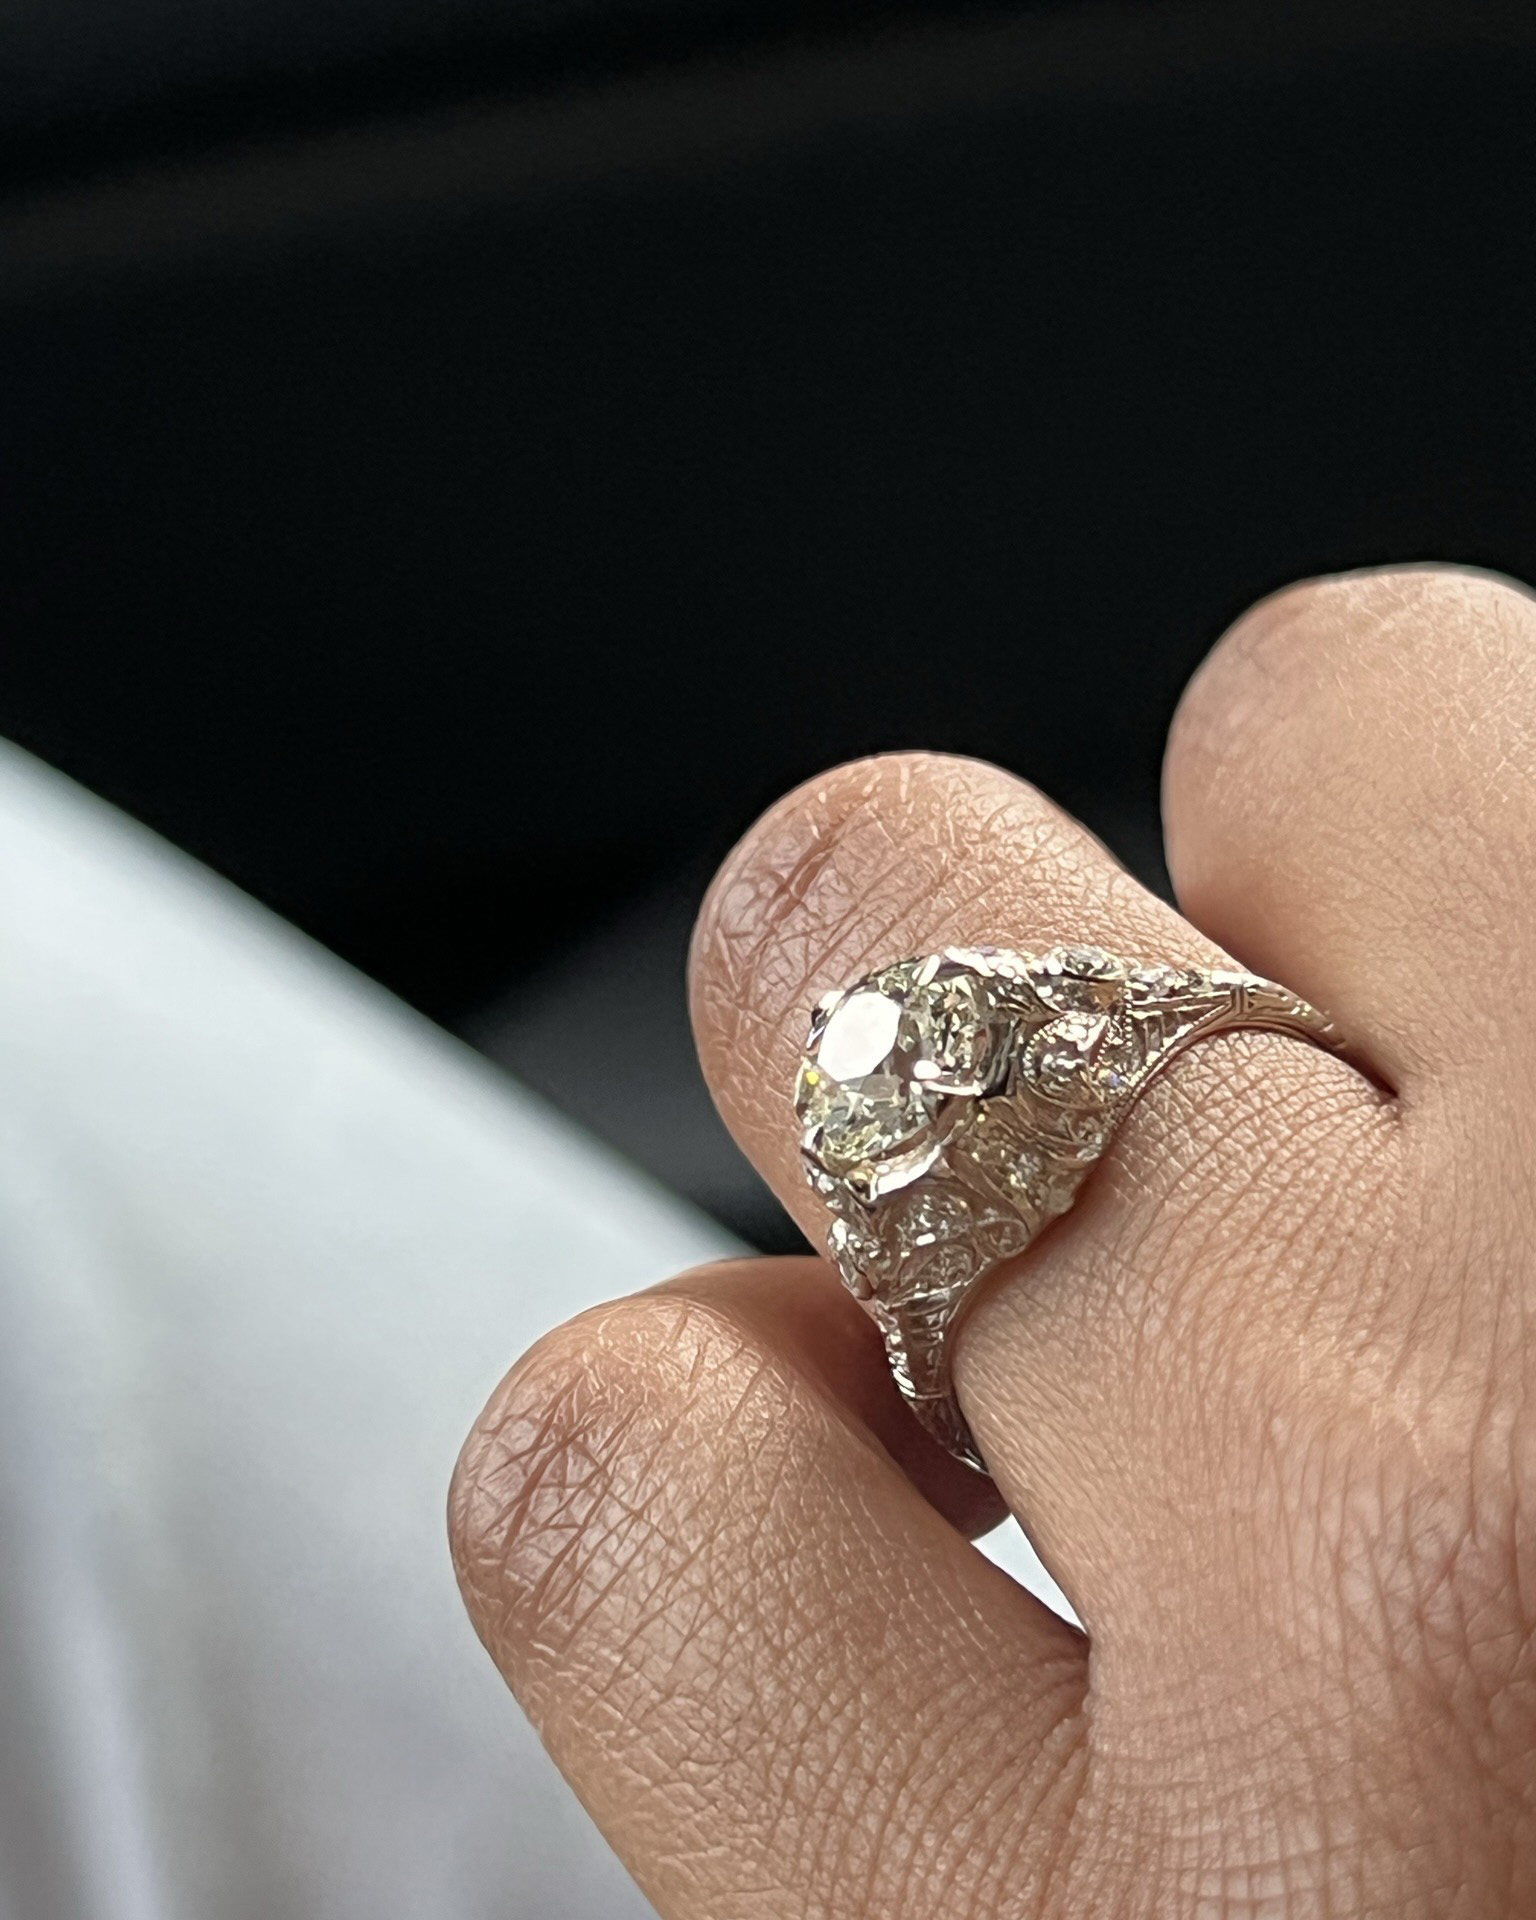 Is this diamond too big for my hand? : r/EngagementRings